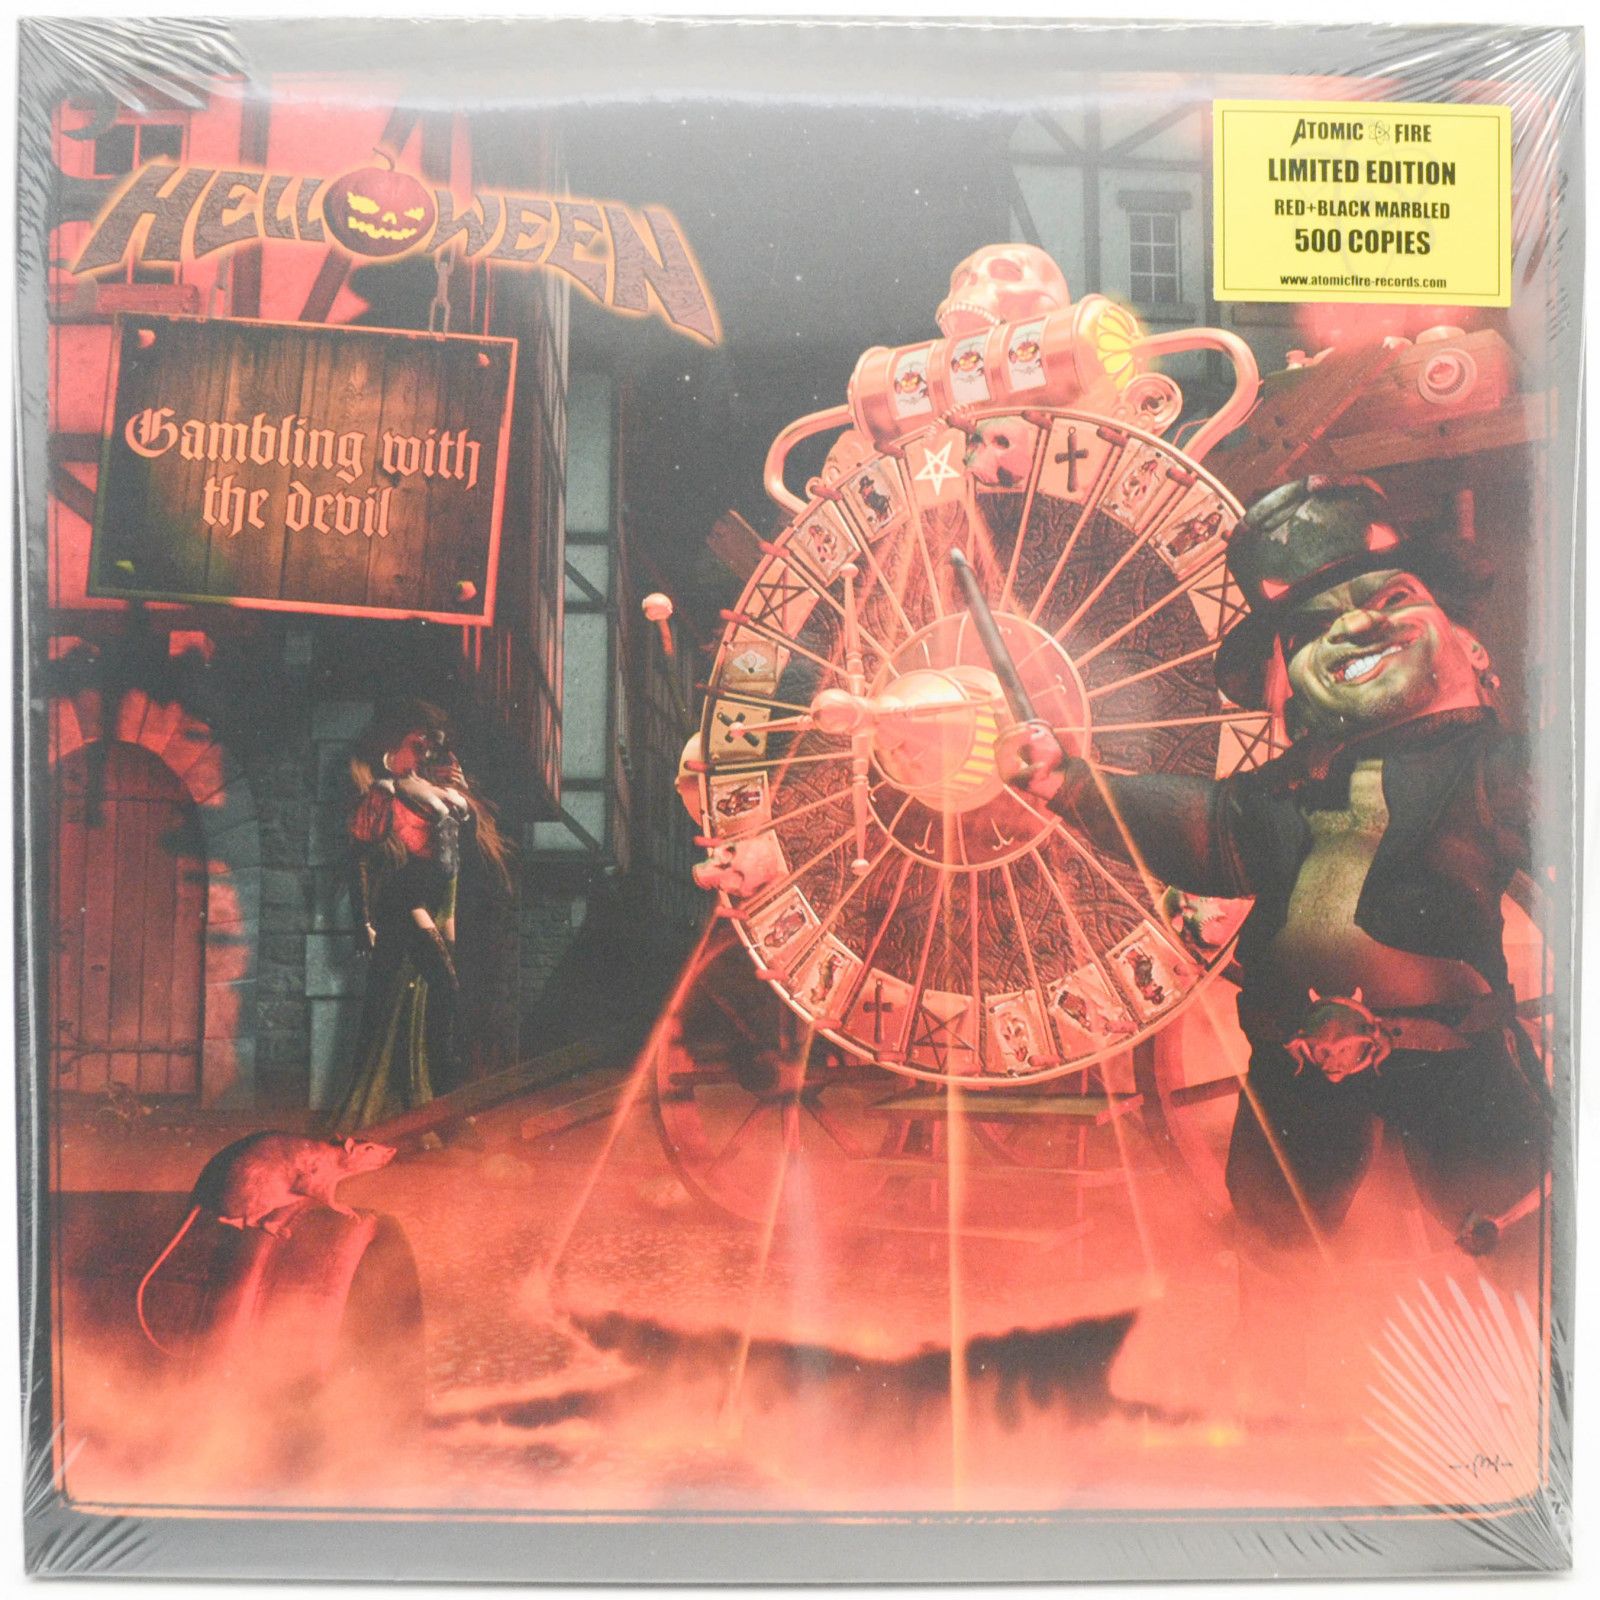 Helloween — Gambling With The Devil (2LP), 2007